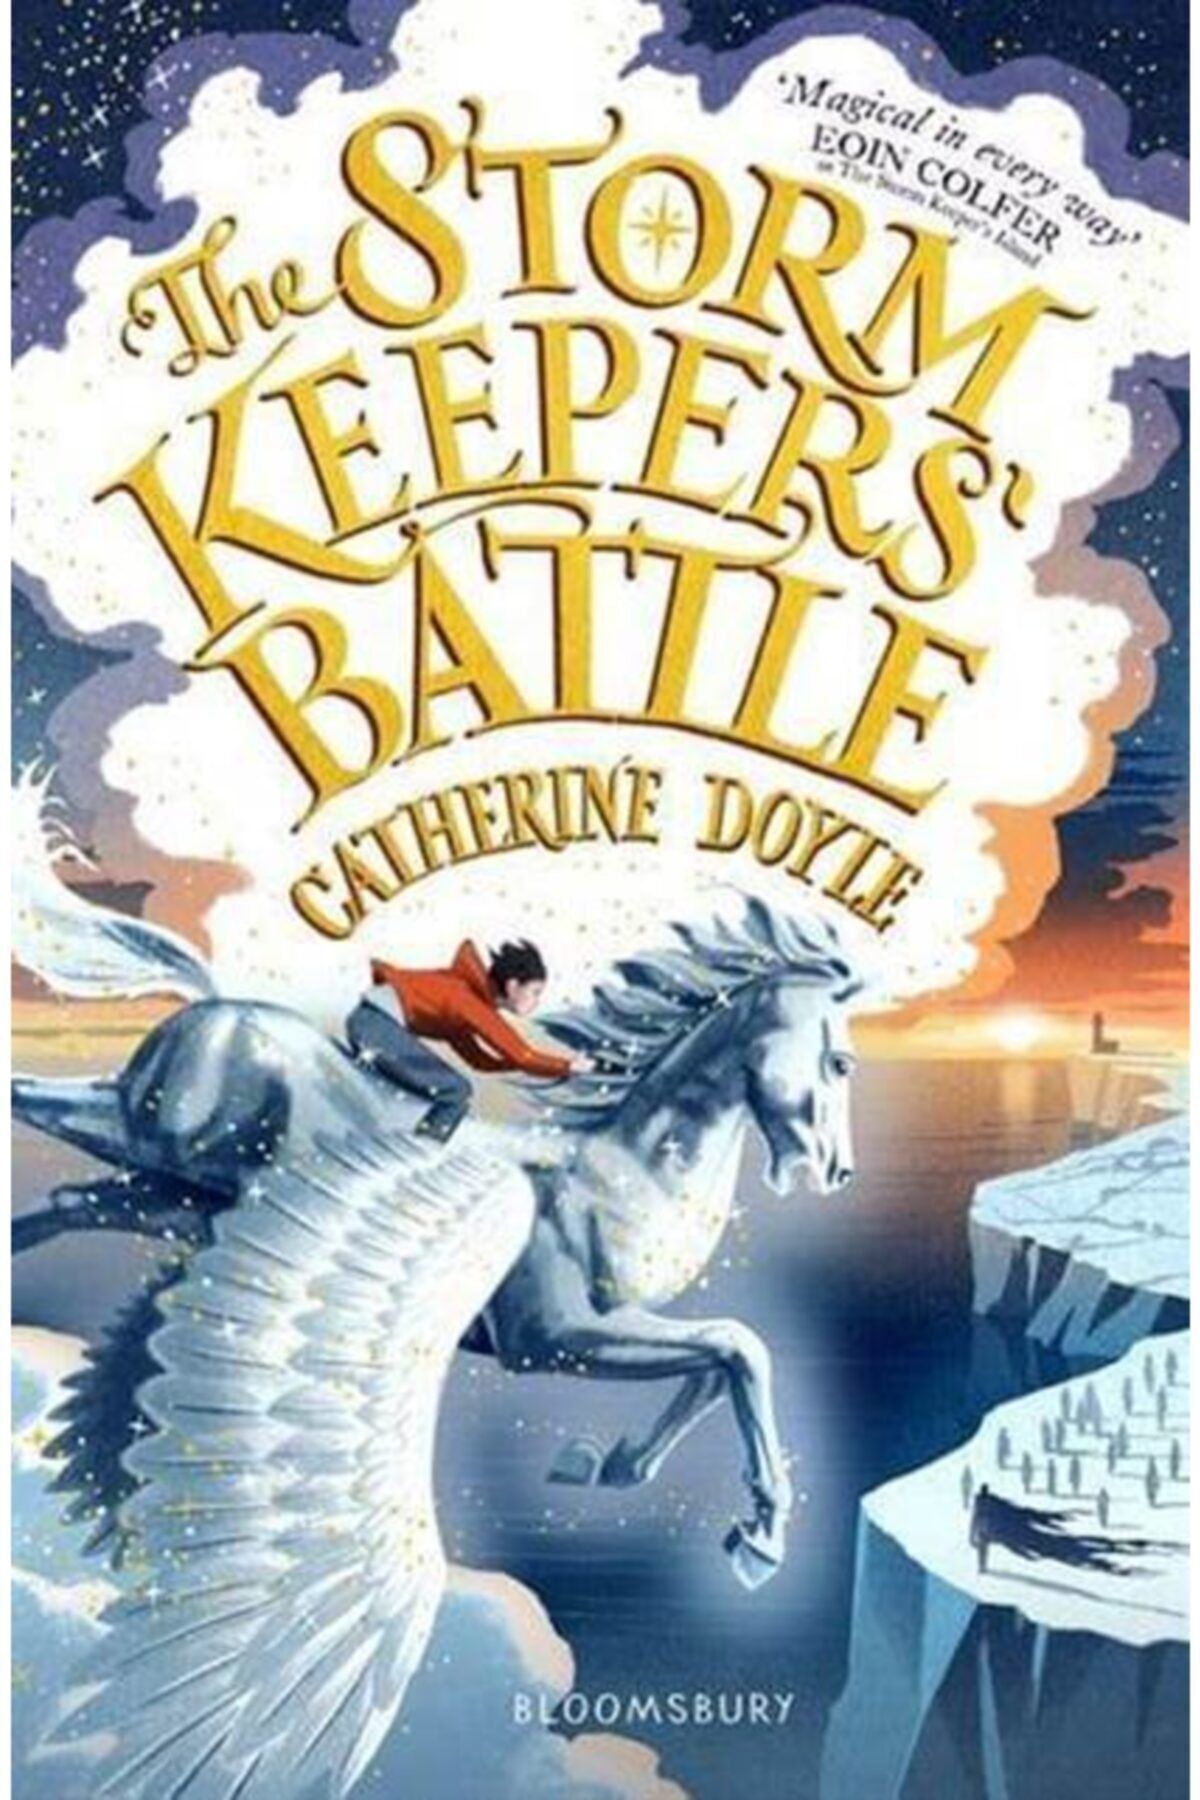 Bloomsbury The Storm Keepers' Battle - The Storm Keeper Trilogy